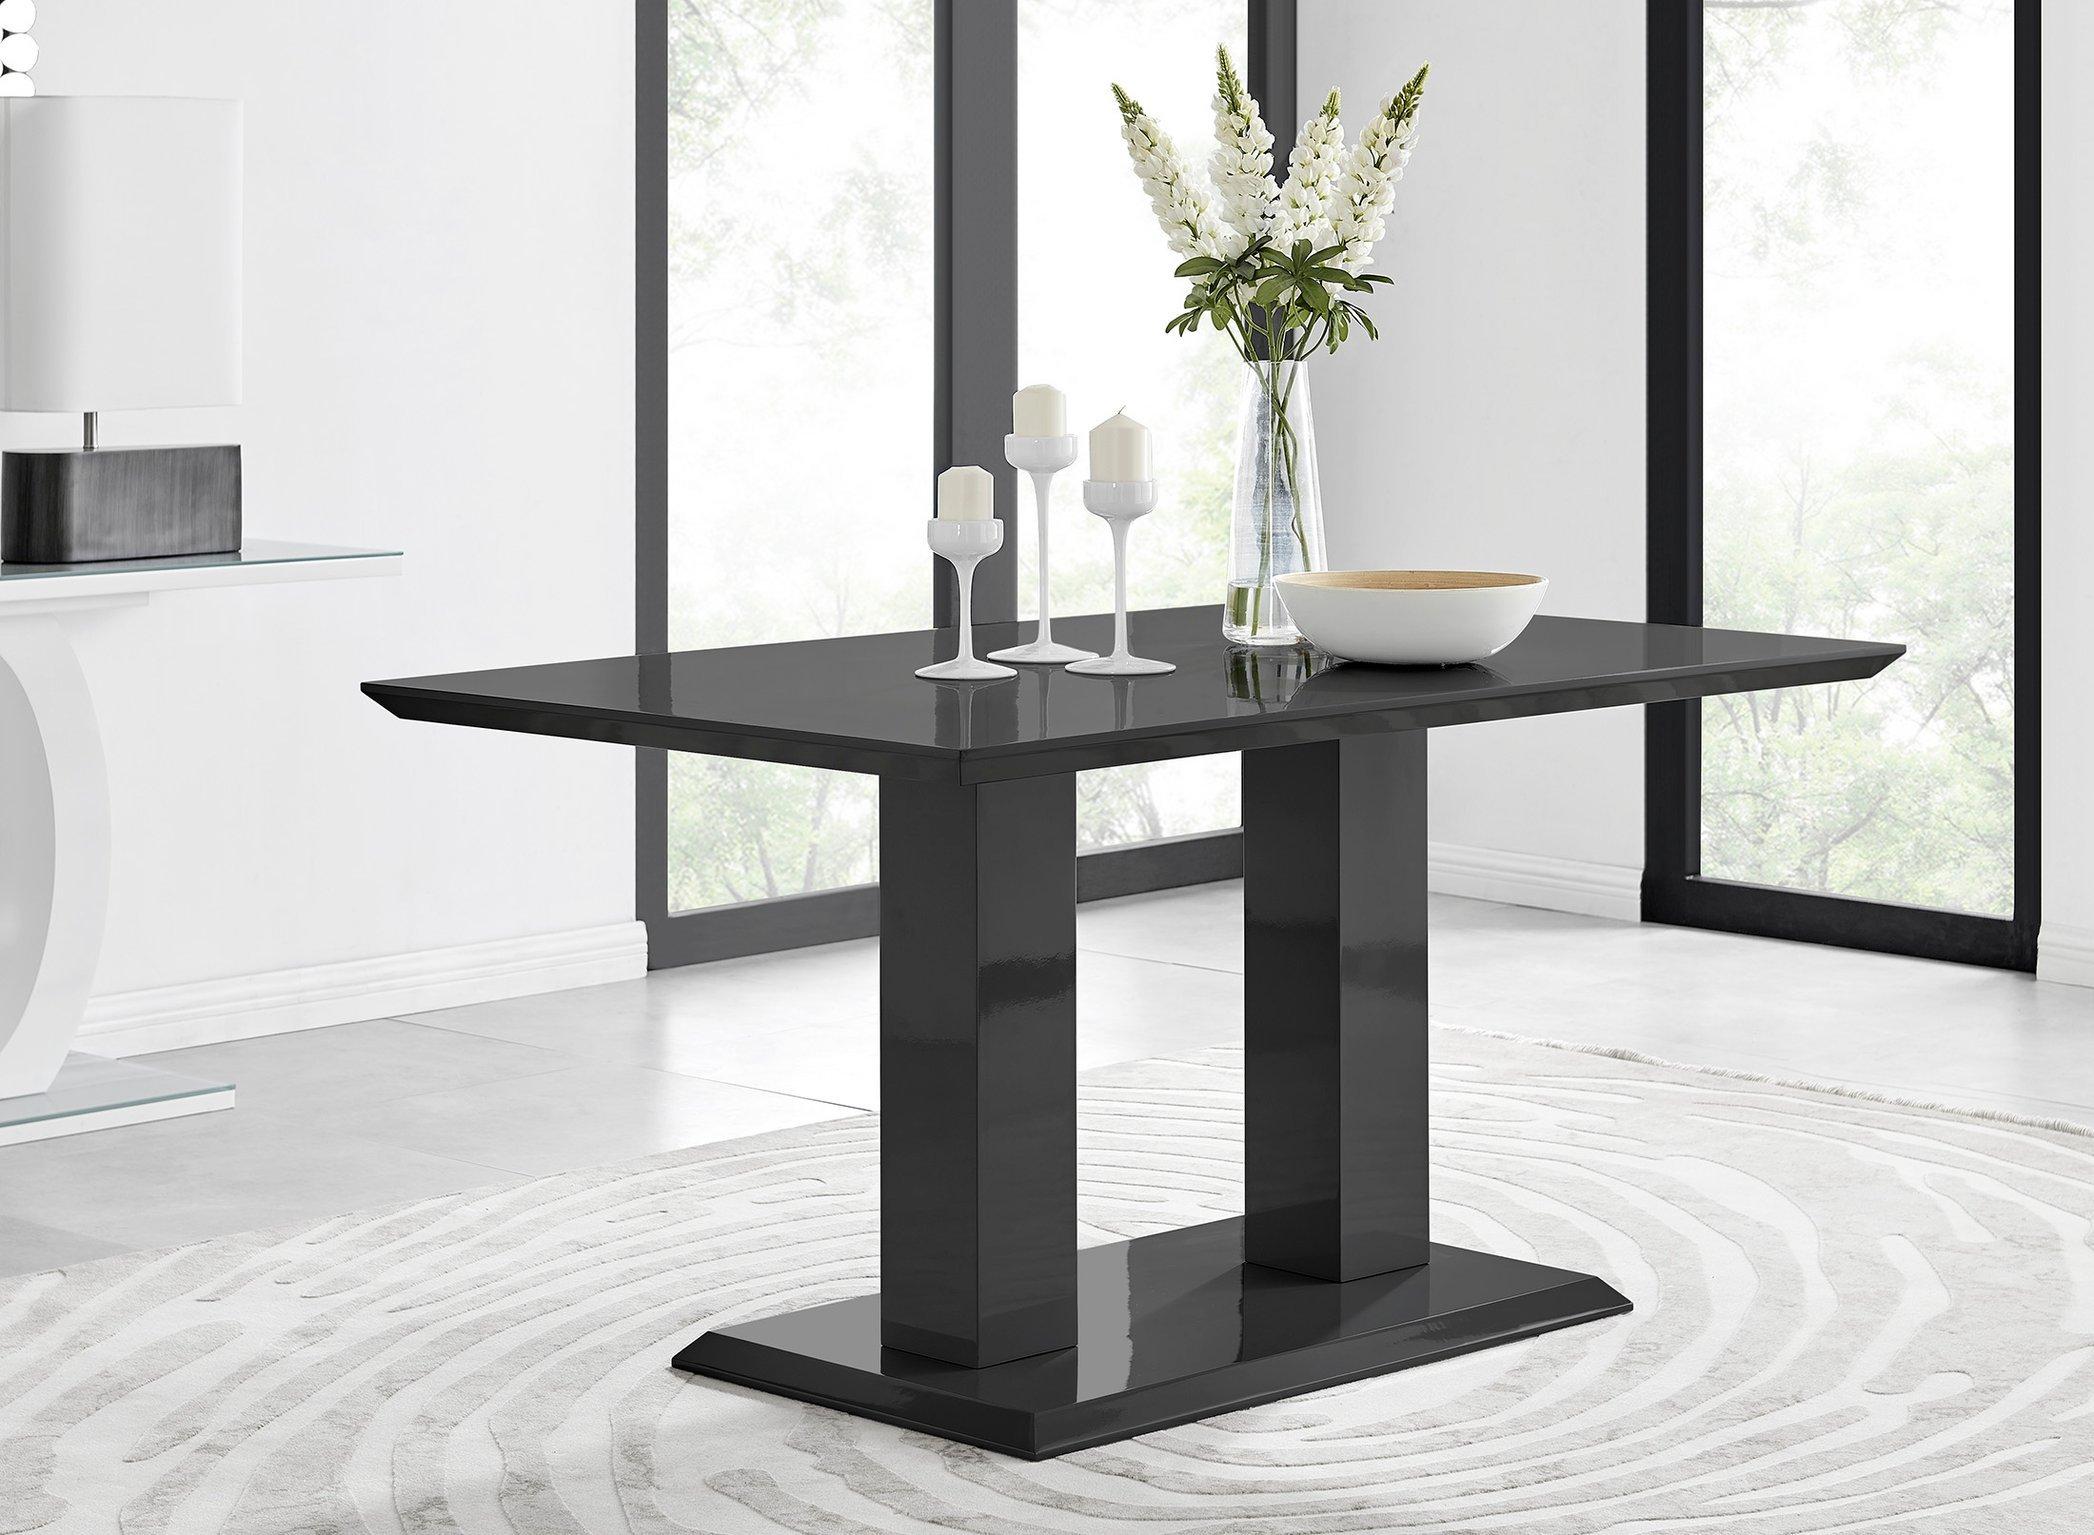 Imperia 150cm 6-Seater Modern High Gloss Pillared Dining Table